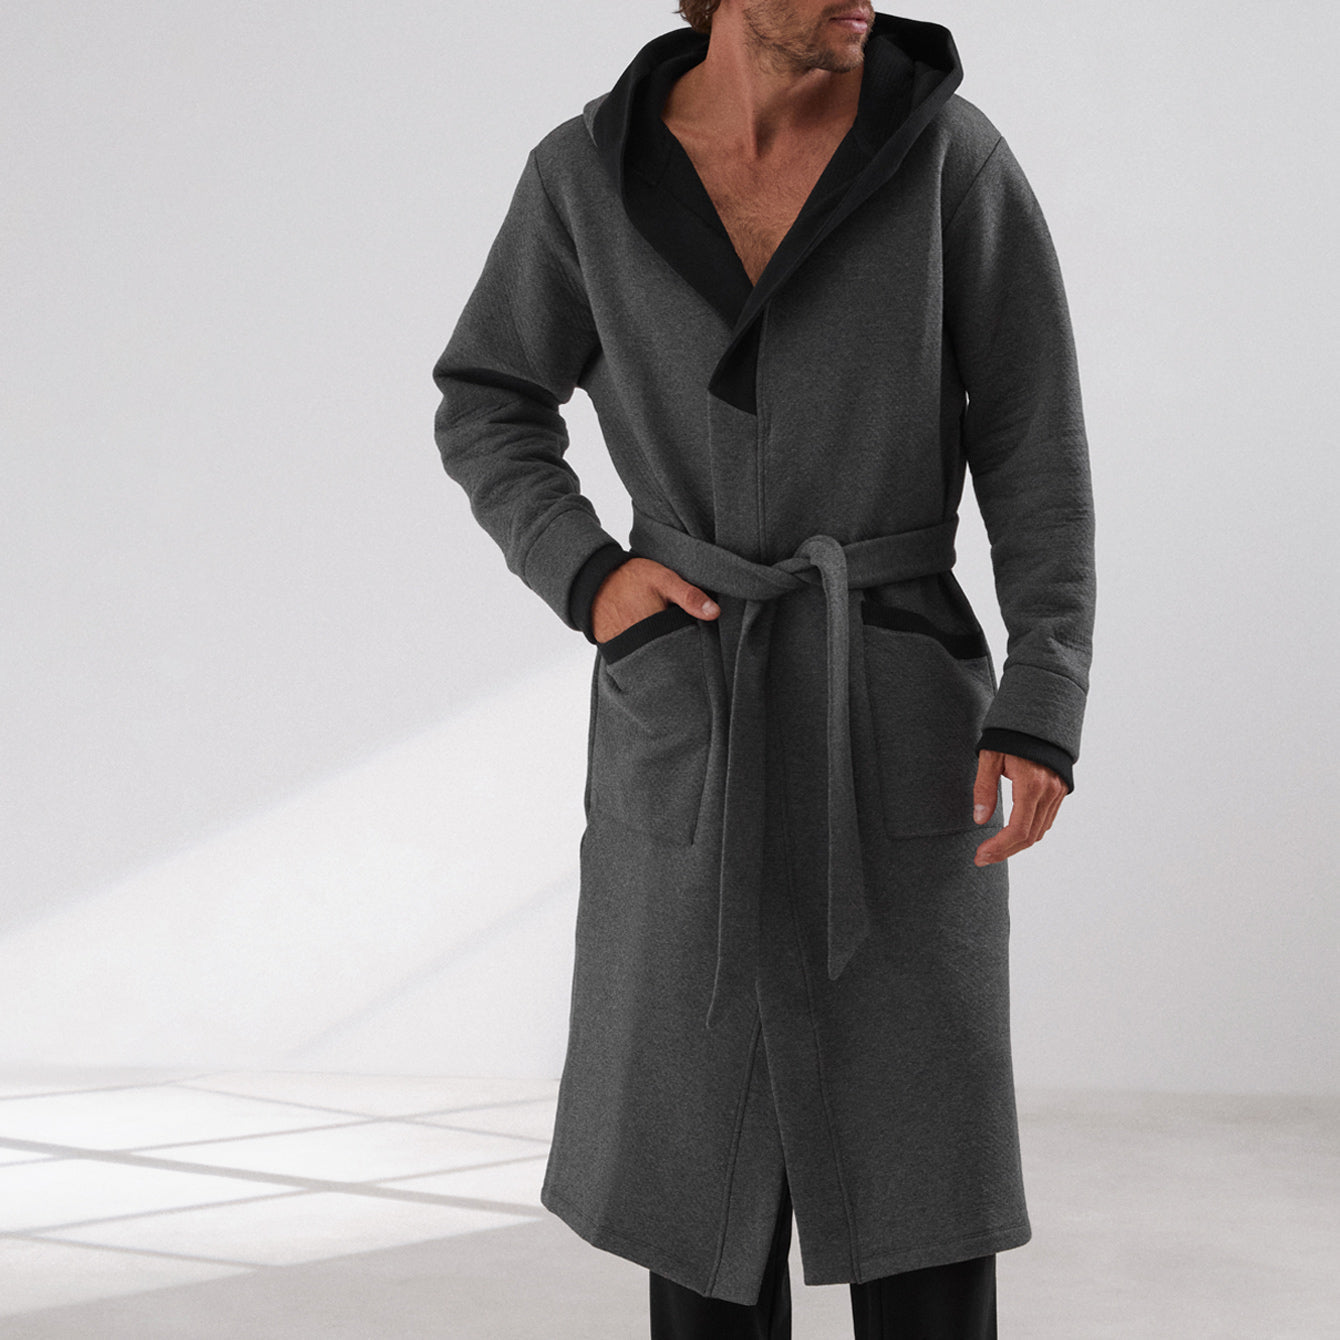 Lahgo Restore Double Faced Robe - #Mercurial Grey Heather/Immersed Black